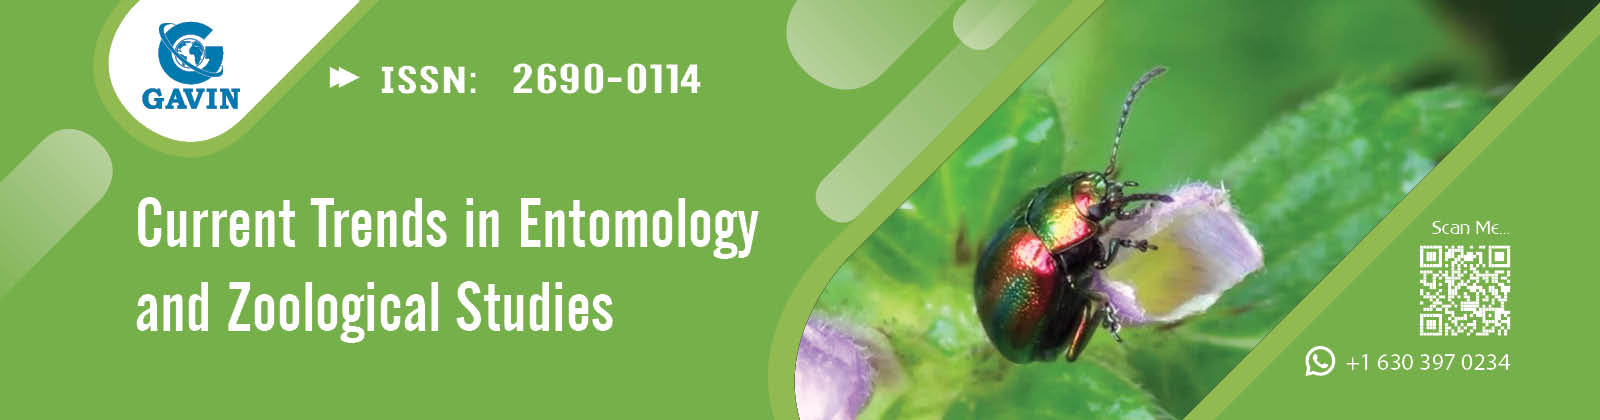 Current Trends in Entomology and Zoological Studies